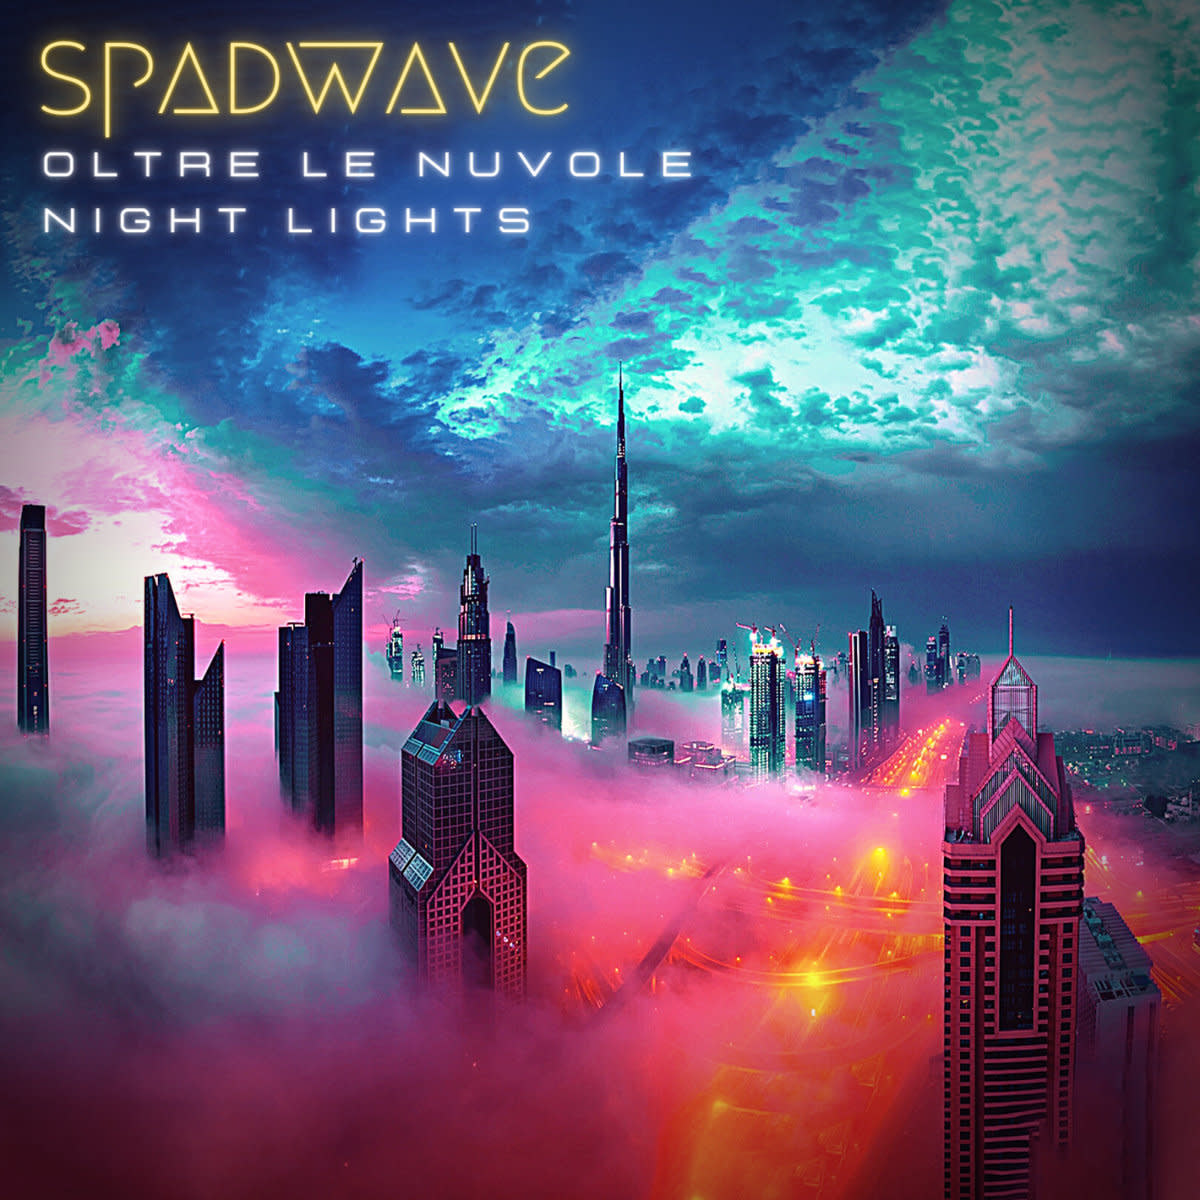 synth-single-review-night-lightsottre-le-nuvole-by-spadwave